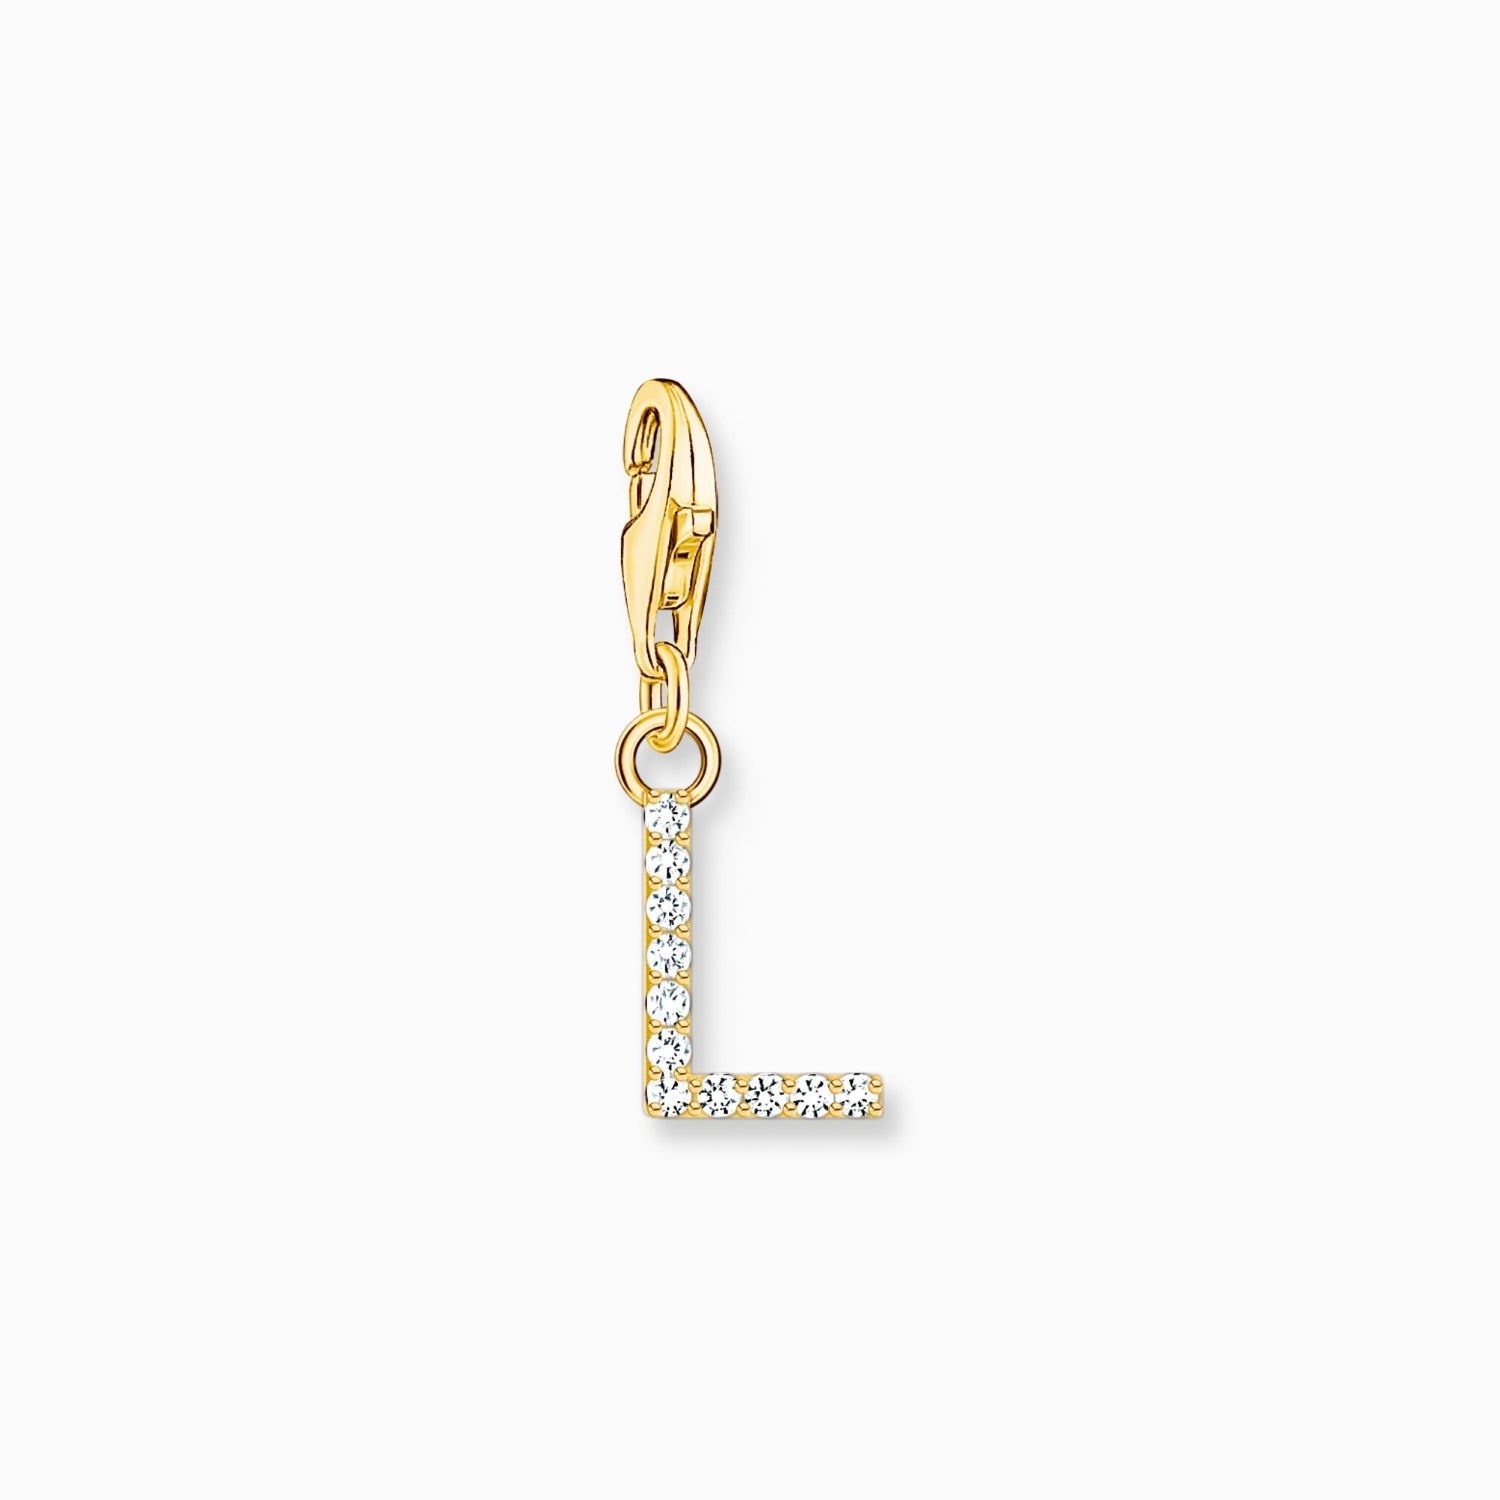 Thomas Sabo Charmista Gold Plated Sterling Silver Letter L Charm Pendant